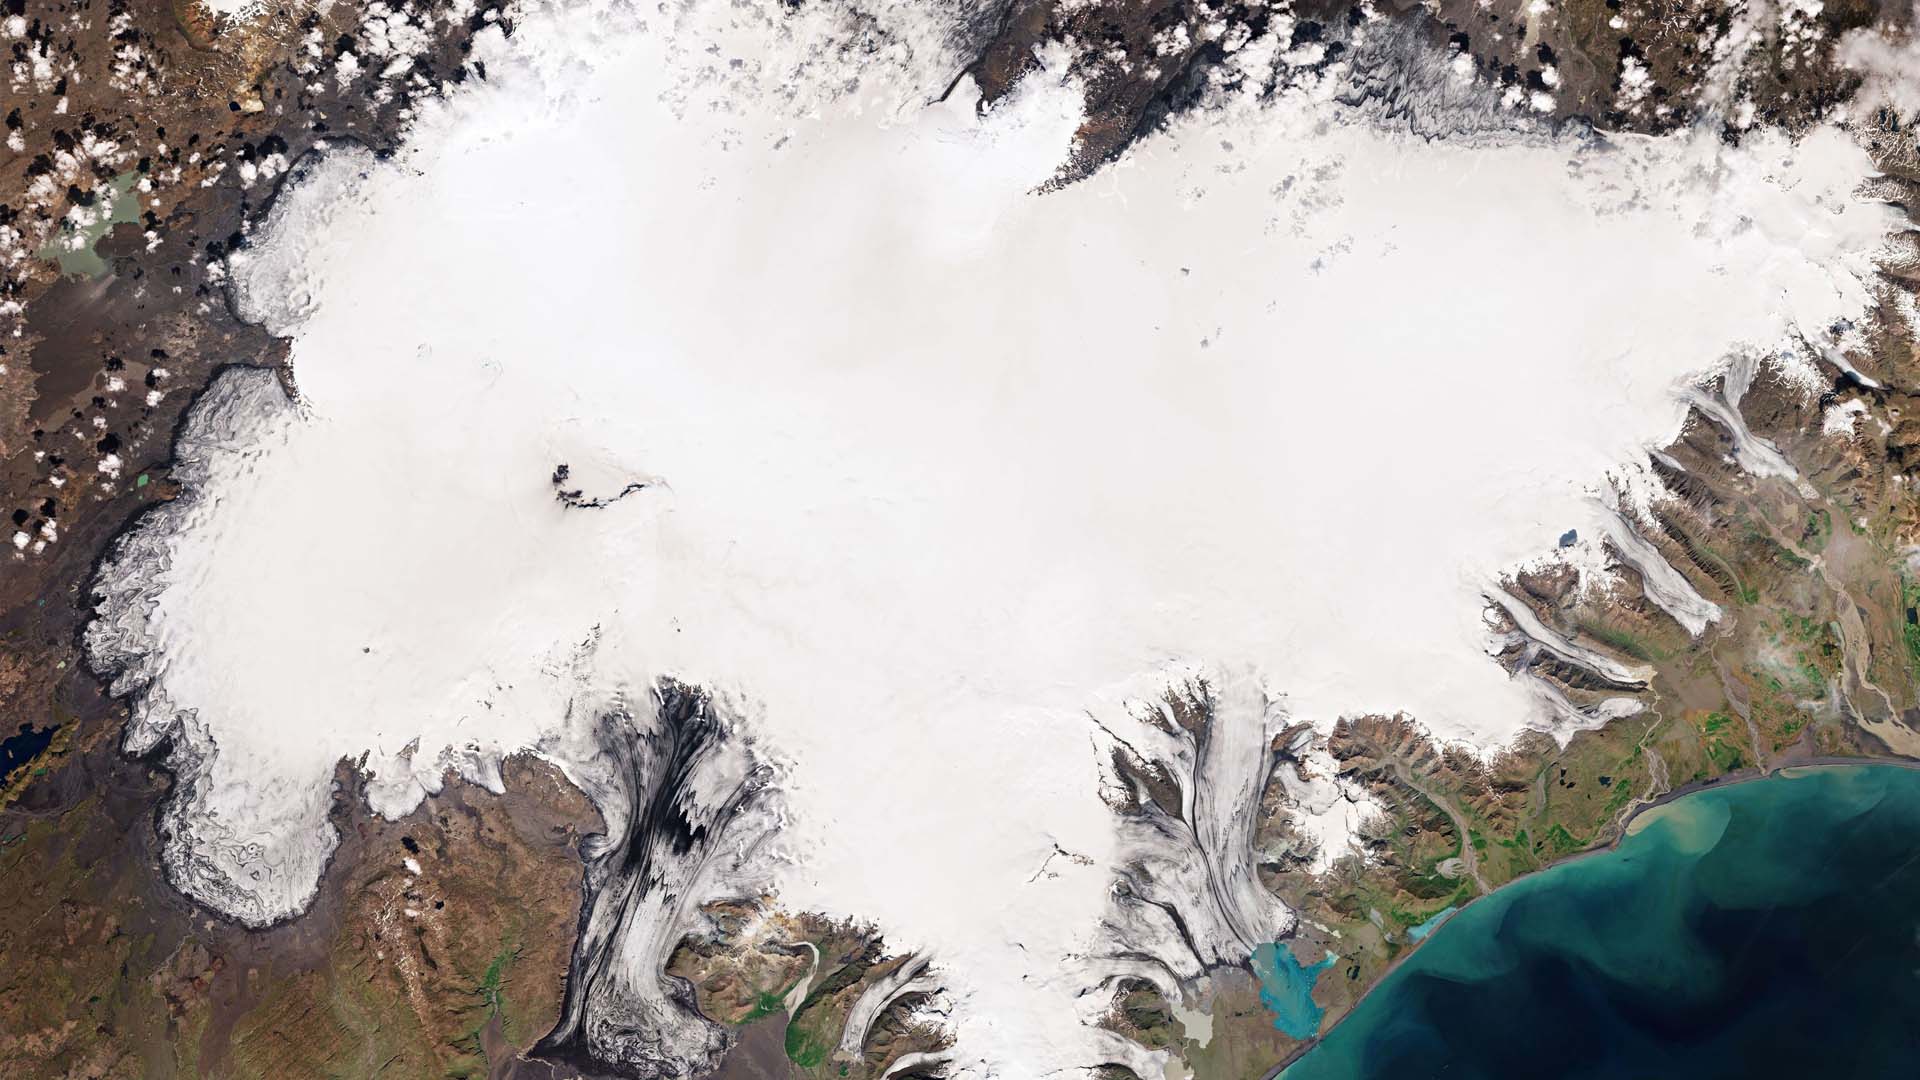 Keeping track of retreating glaciers in Iceland